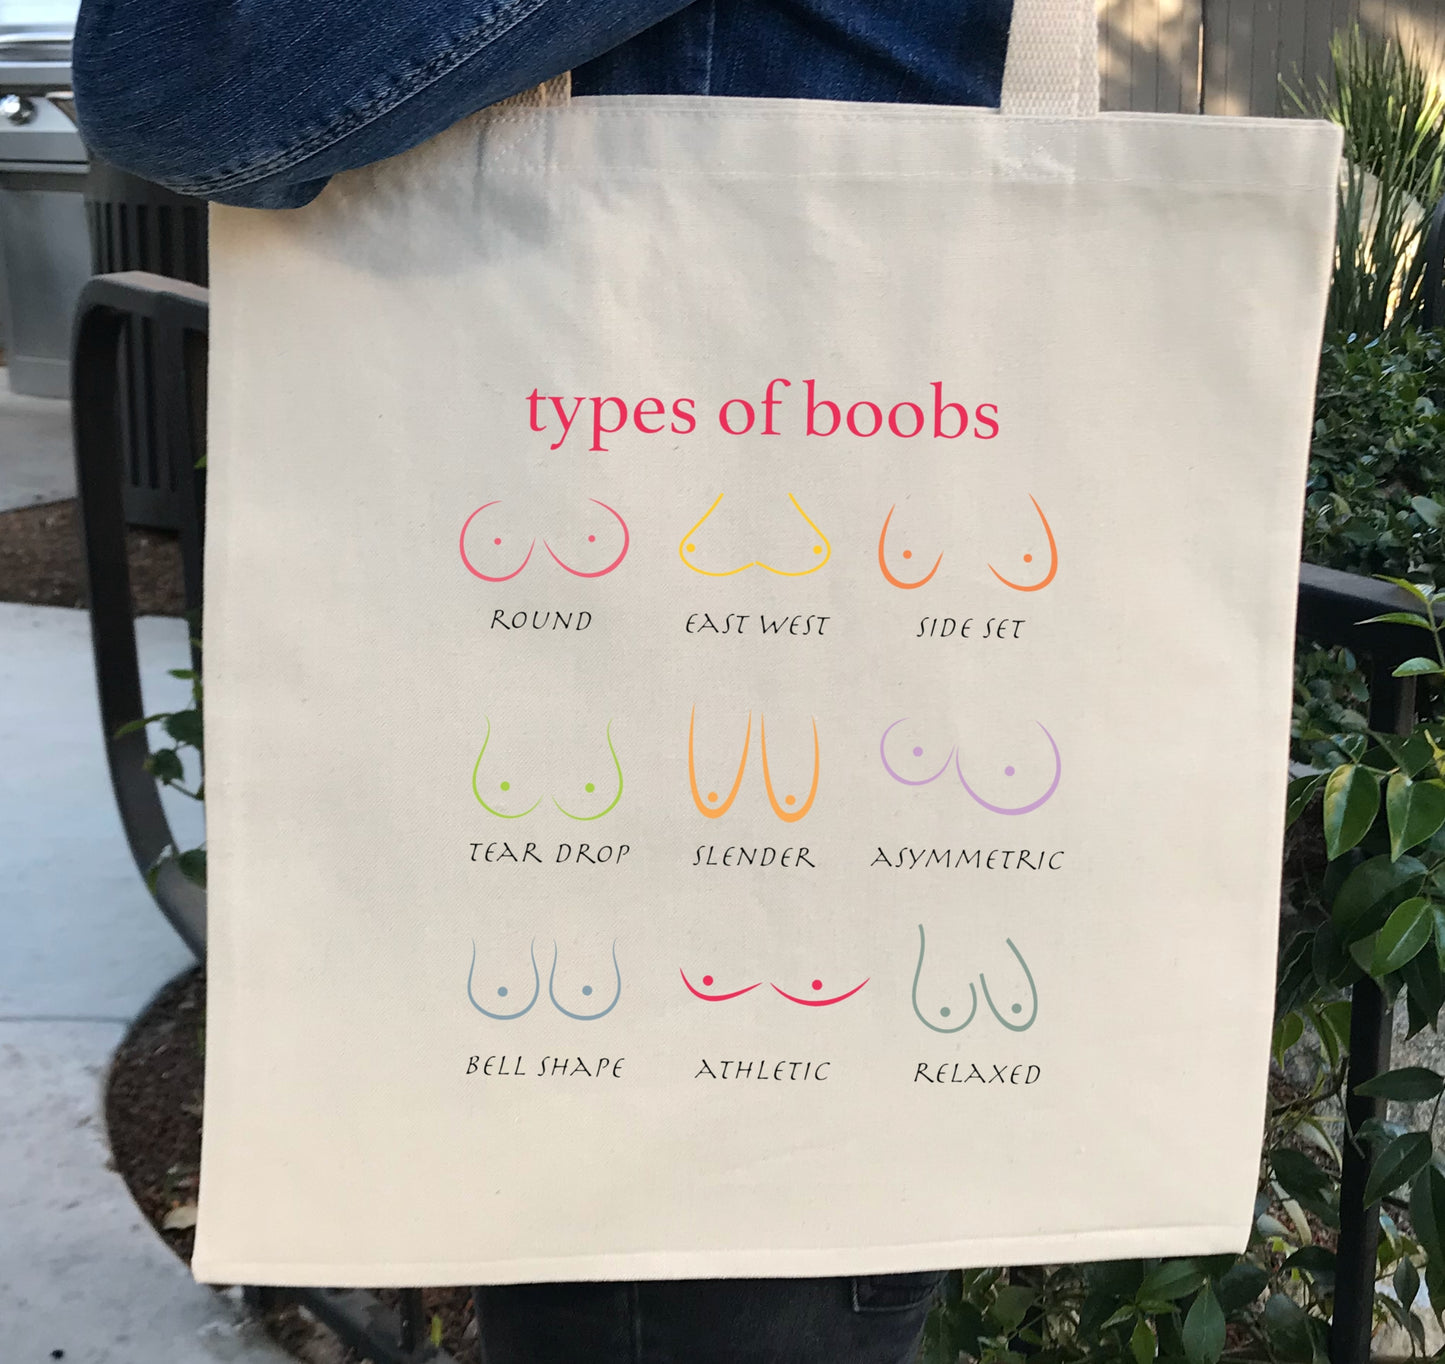 BodrumCrafts Boobs Printed Funny Canvas Tote Bags